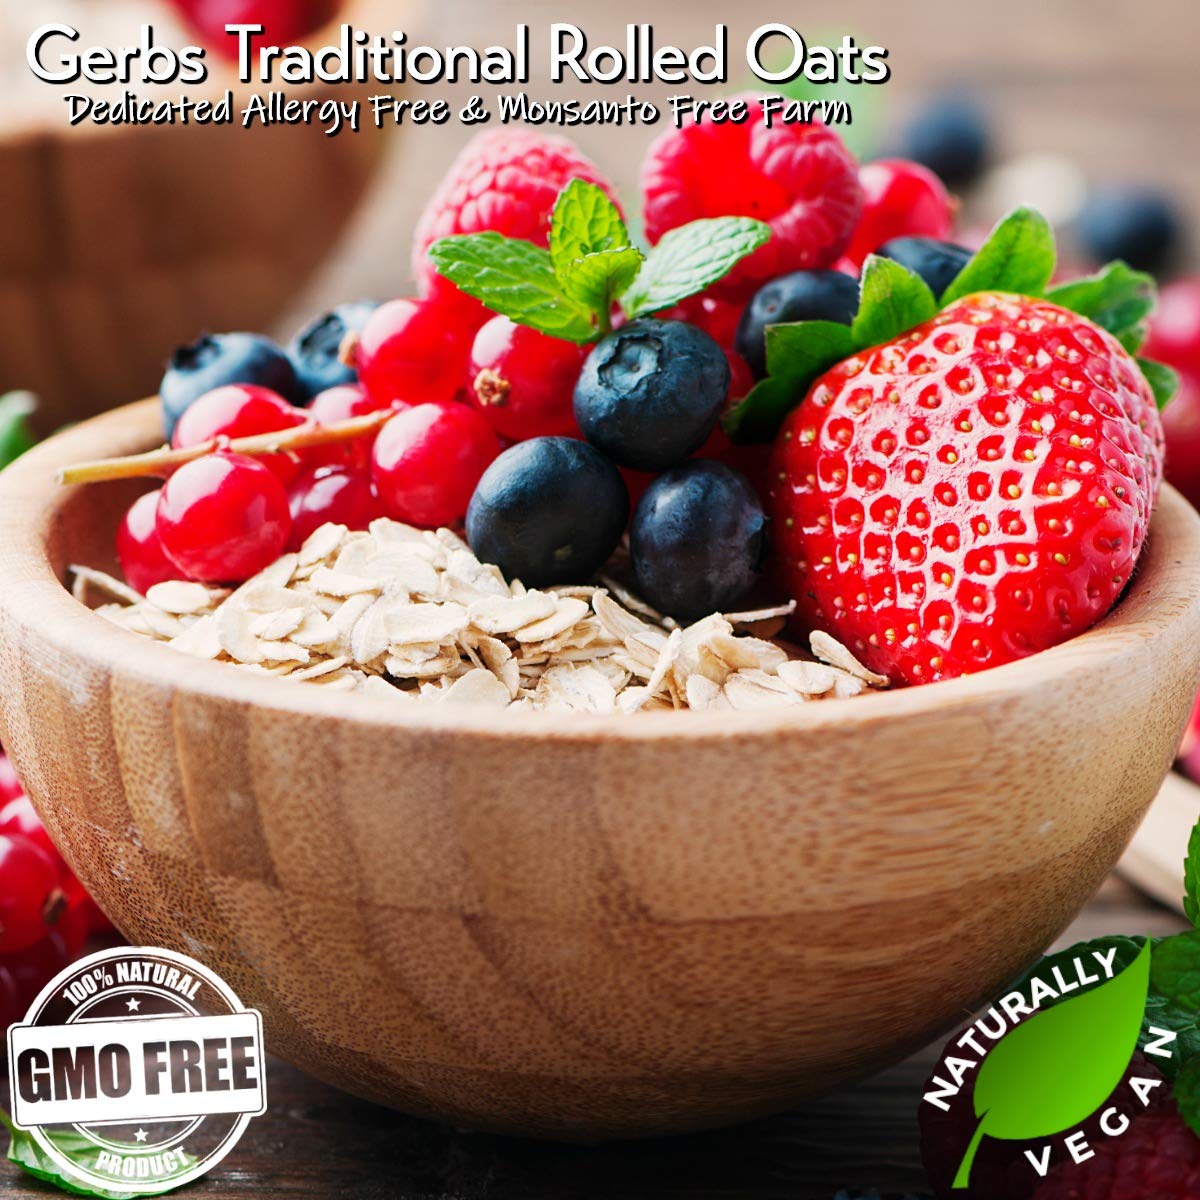 GERBS Traditional Rolled Oats 2 LBS. Premium Grade | Top 14 Food Allergy Free | Freshly harvested in Resealable Bulk Bag | High in Fiber & Antioxidants, Control overeating | Gluten Peanut Tree Nut Free